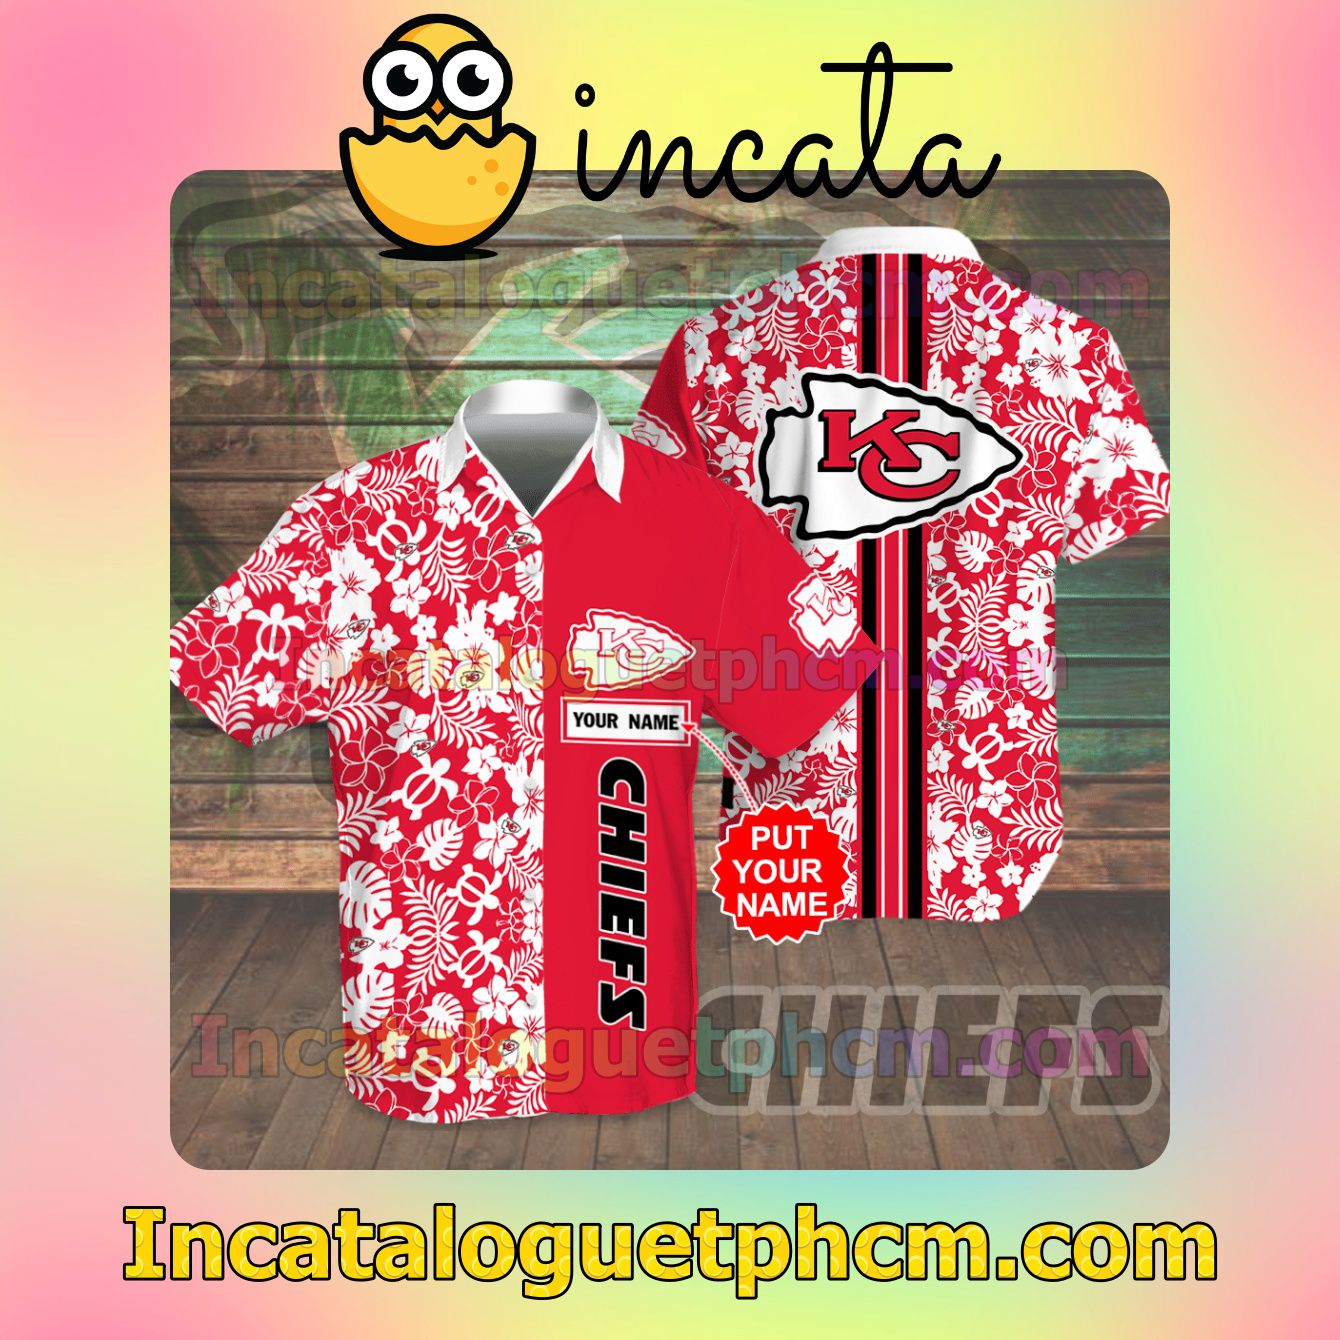 Personalized Kansas City Chiefs Flowery Red Button Shirt And Swim Trunk